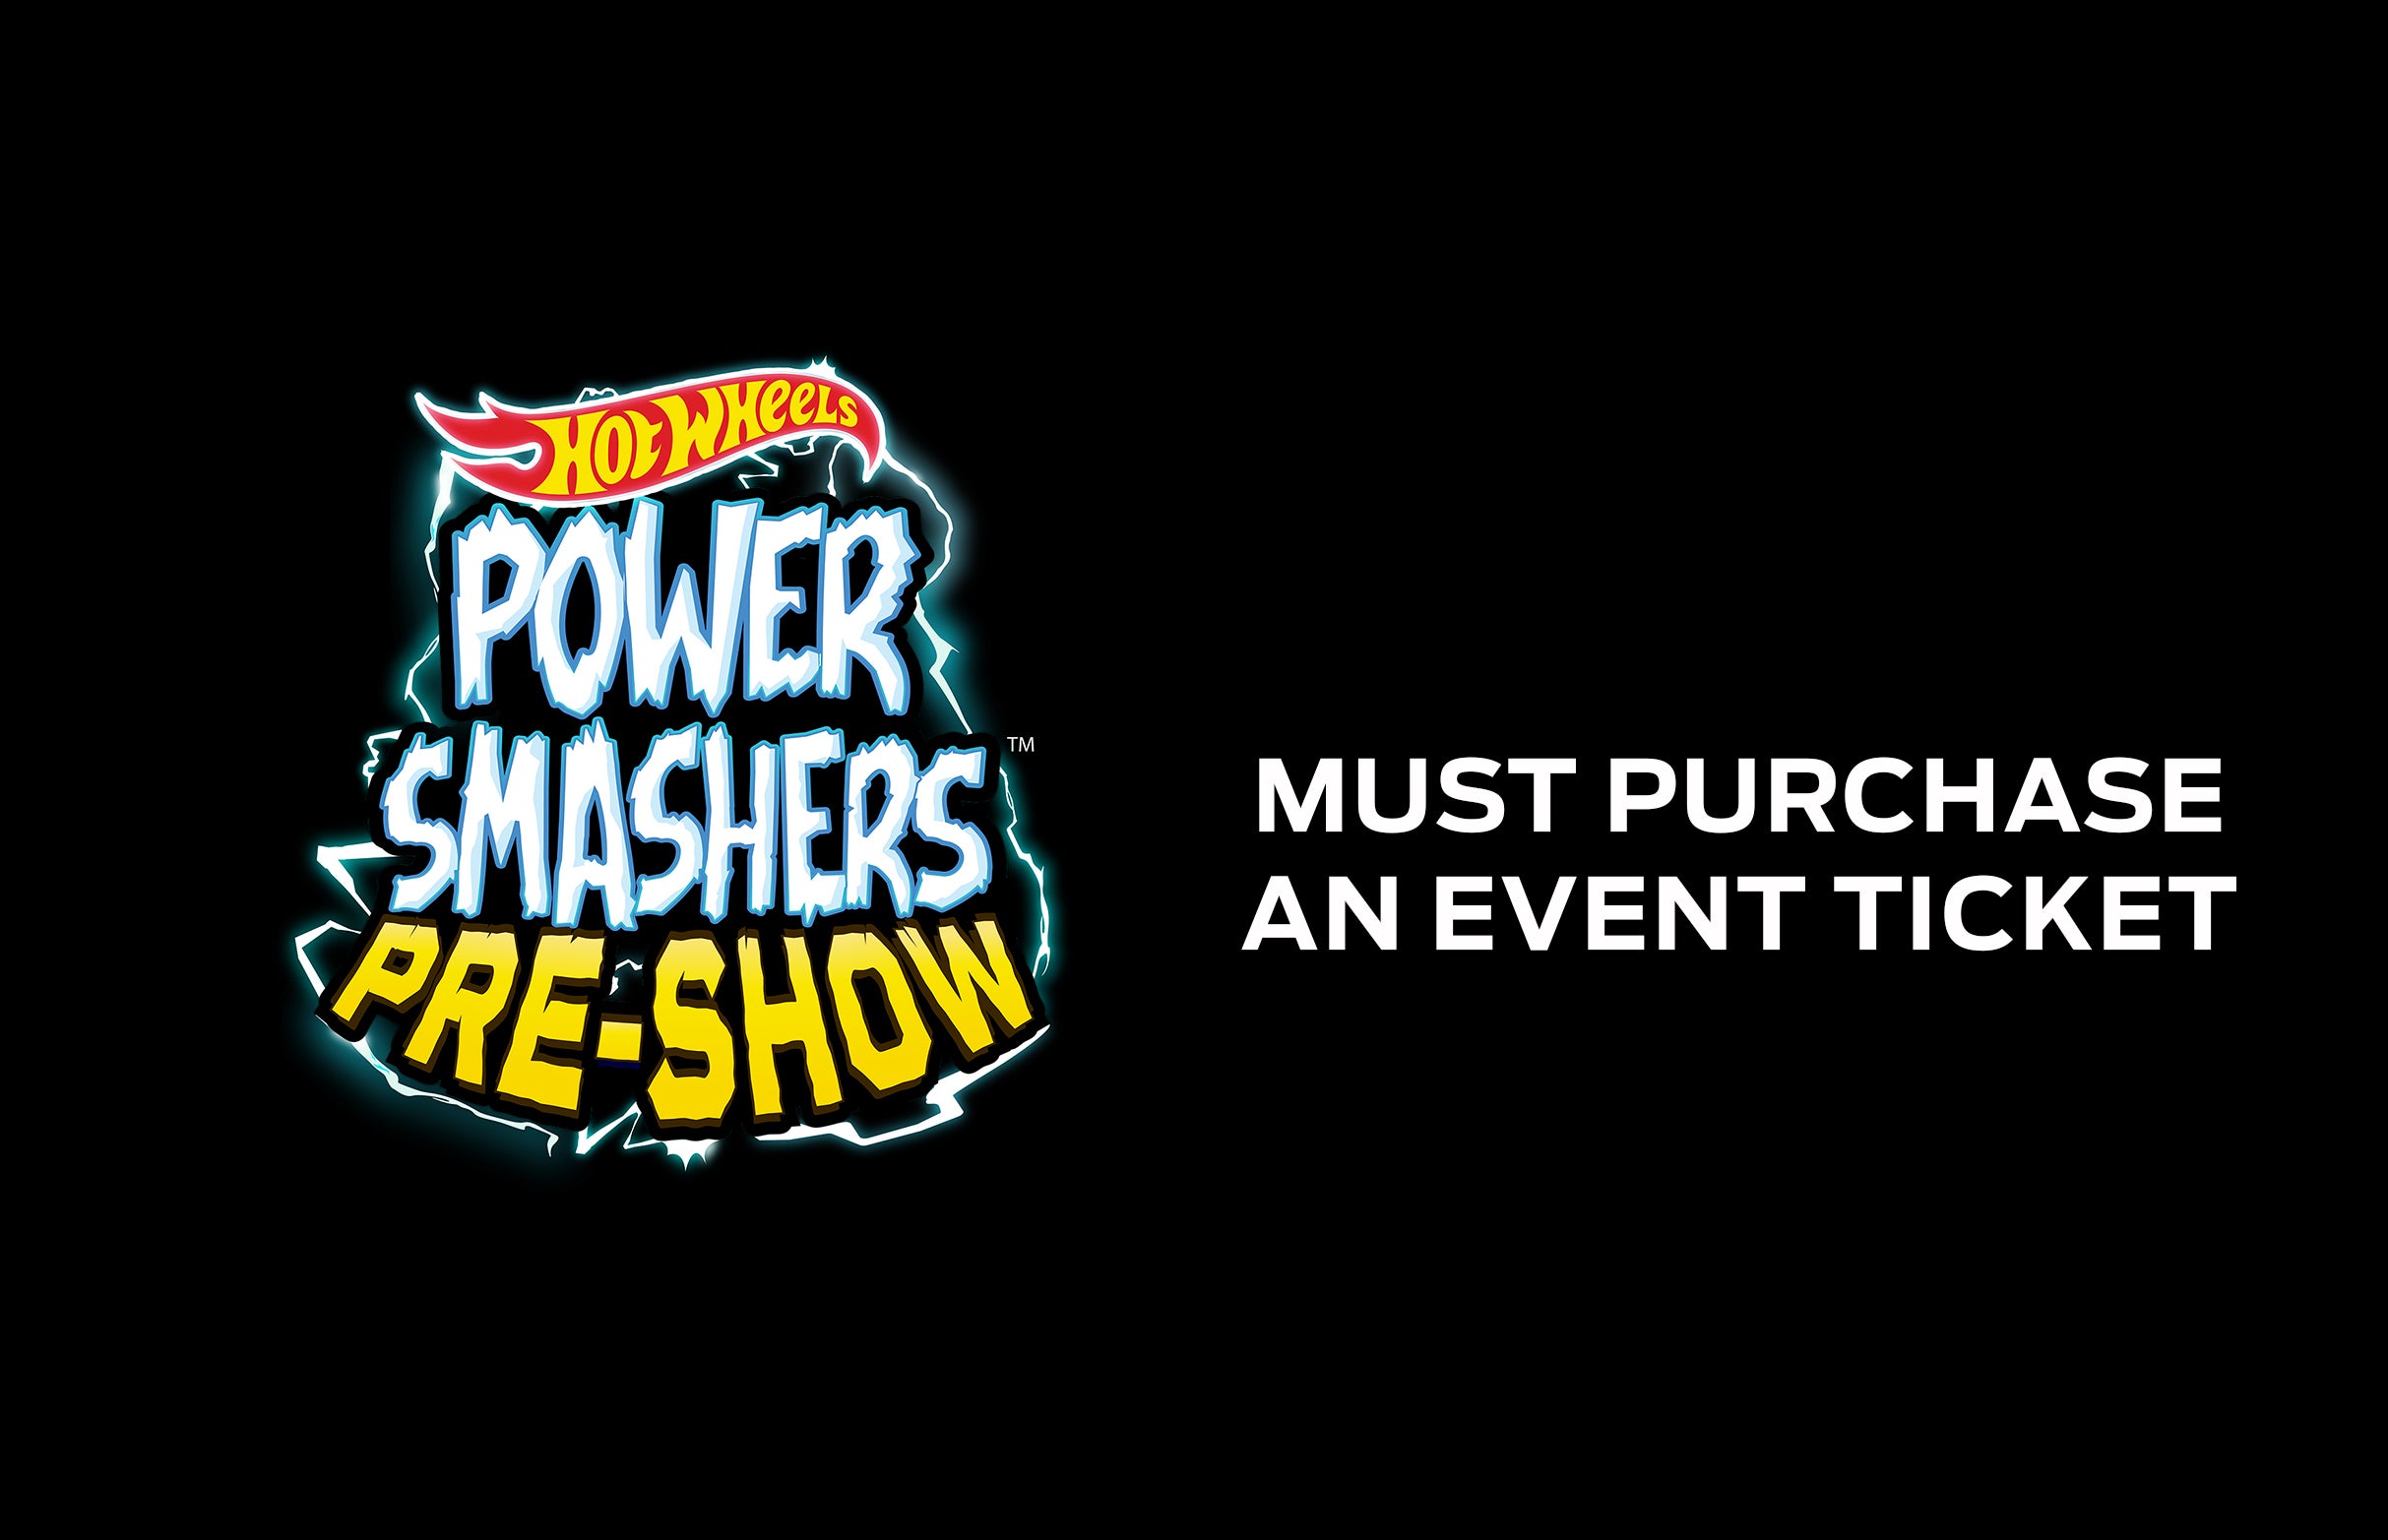 Hot Wheels Power Smashers Pre-Show Starts At 12pm presales in Indianapolis